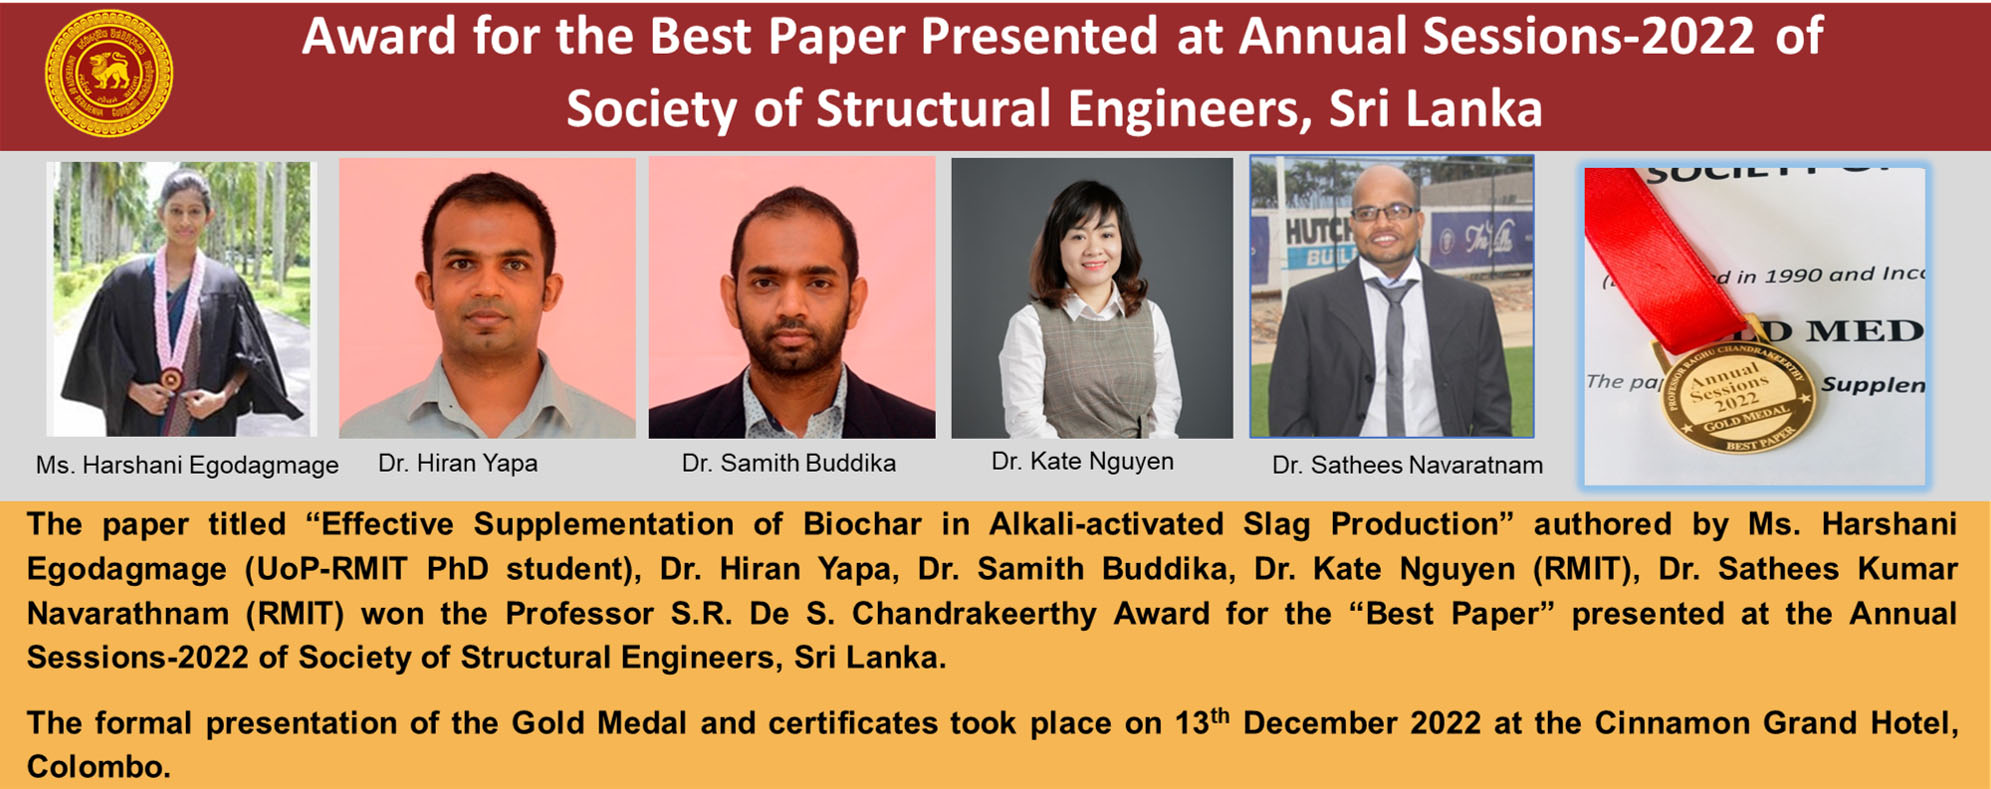 Award for the Best Paper Presented at the Annual Secessions - 2022 of the Society of Structural Engineers - Sri Lanka